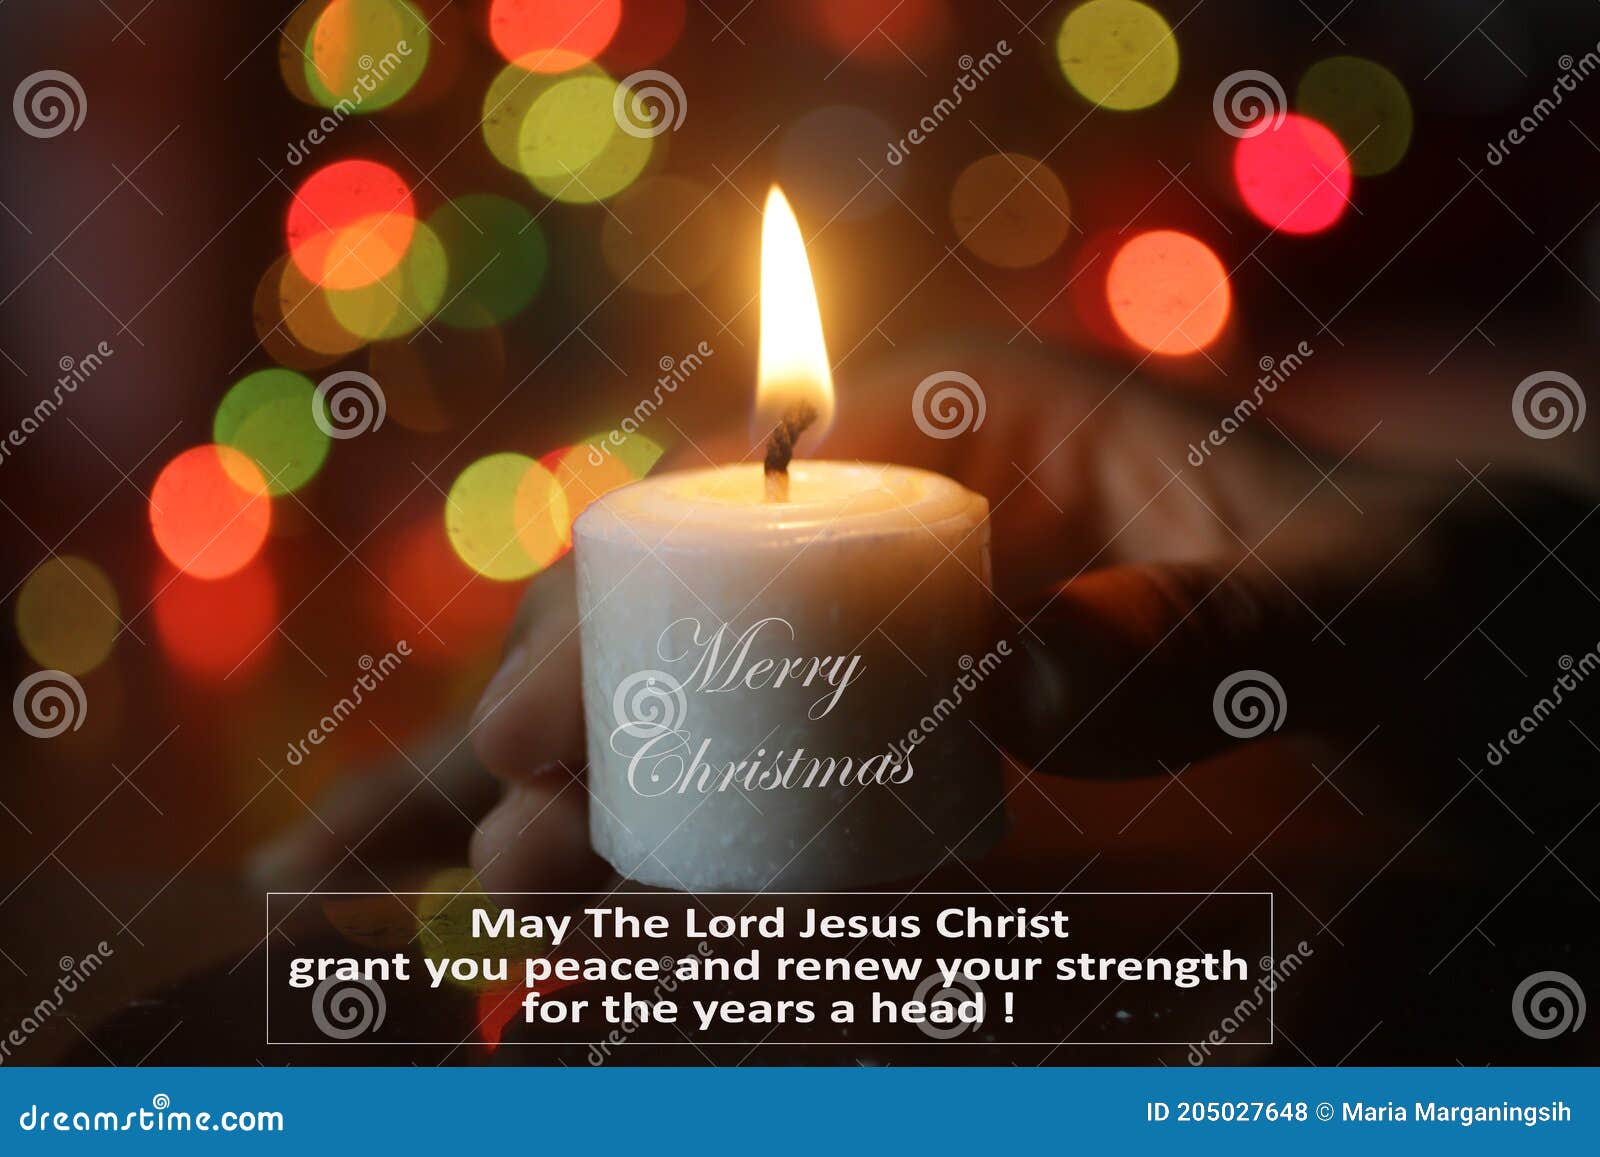 Merry Christmas. May the Lord Jesus Christ Grant You Peace and ...